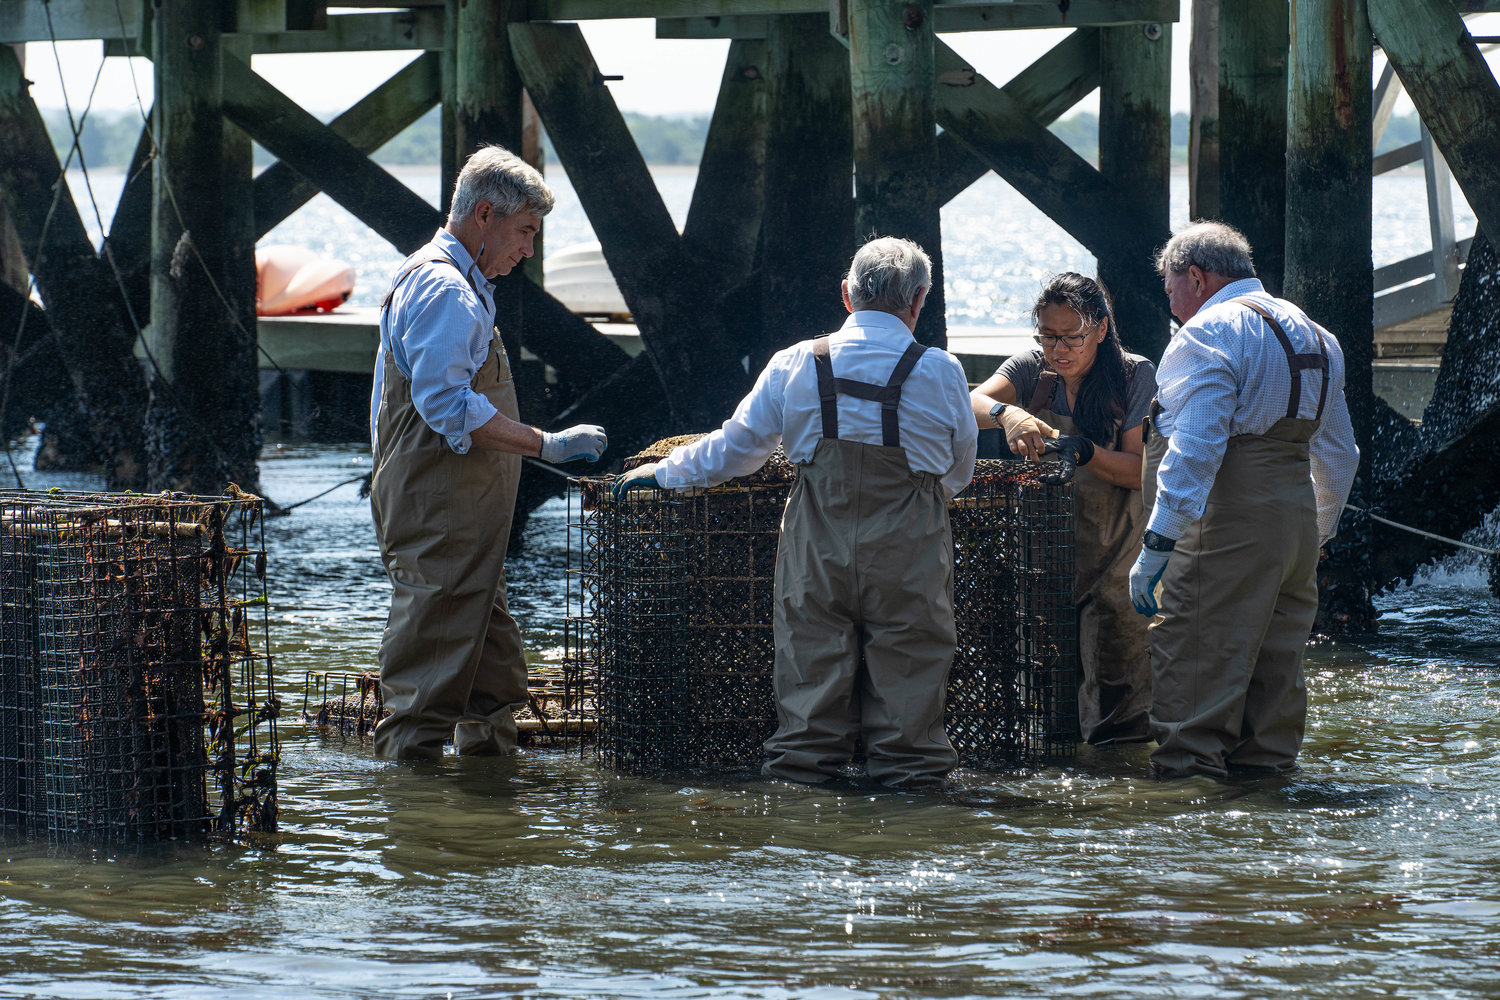 Susanna Osinski, a Roger Williams University shellfish field technician and research associate, leads Senators Sheldon Whitehouse (left) and Jack Reed (center) on a “wet tour” of the university’s oyster farm, along with RWU President Ioannis Miaoulis (right).